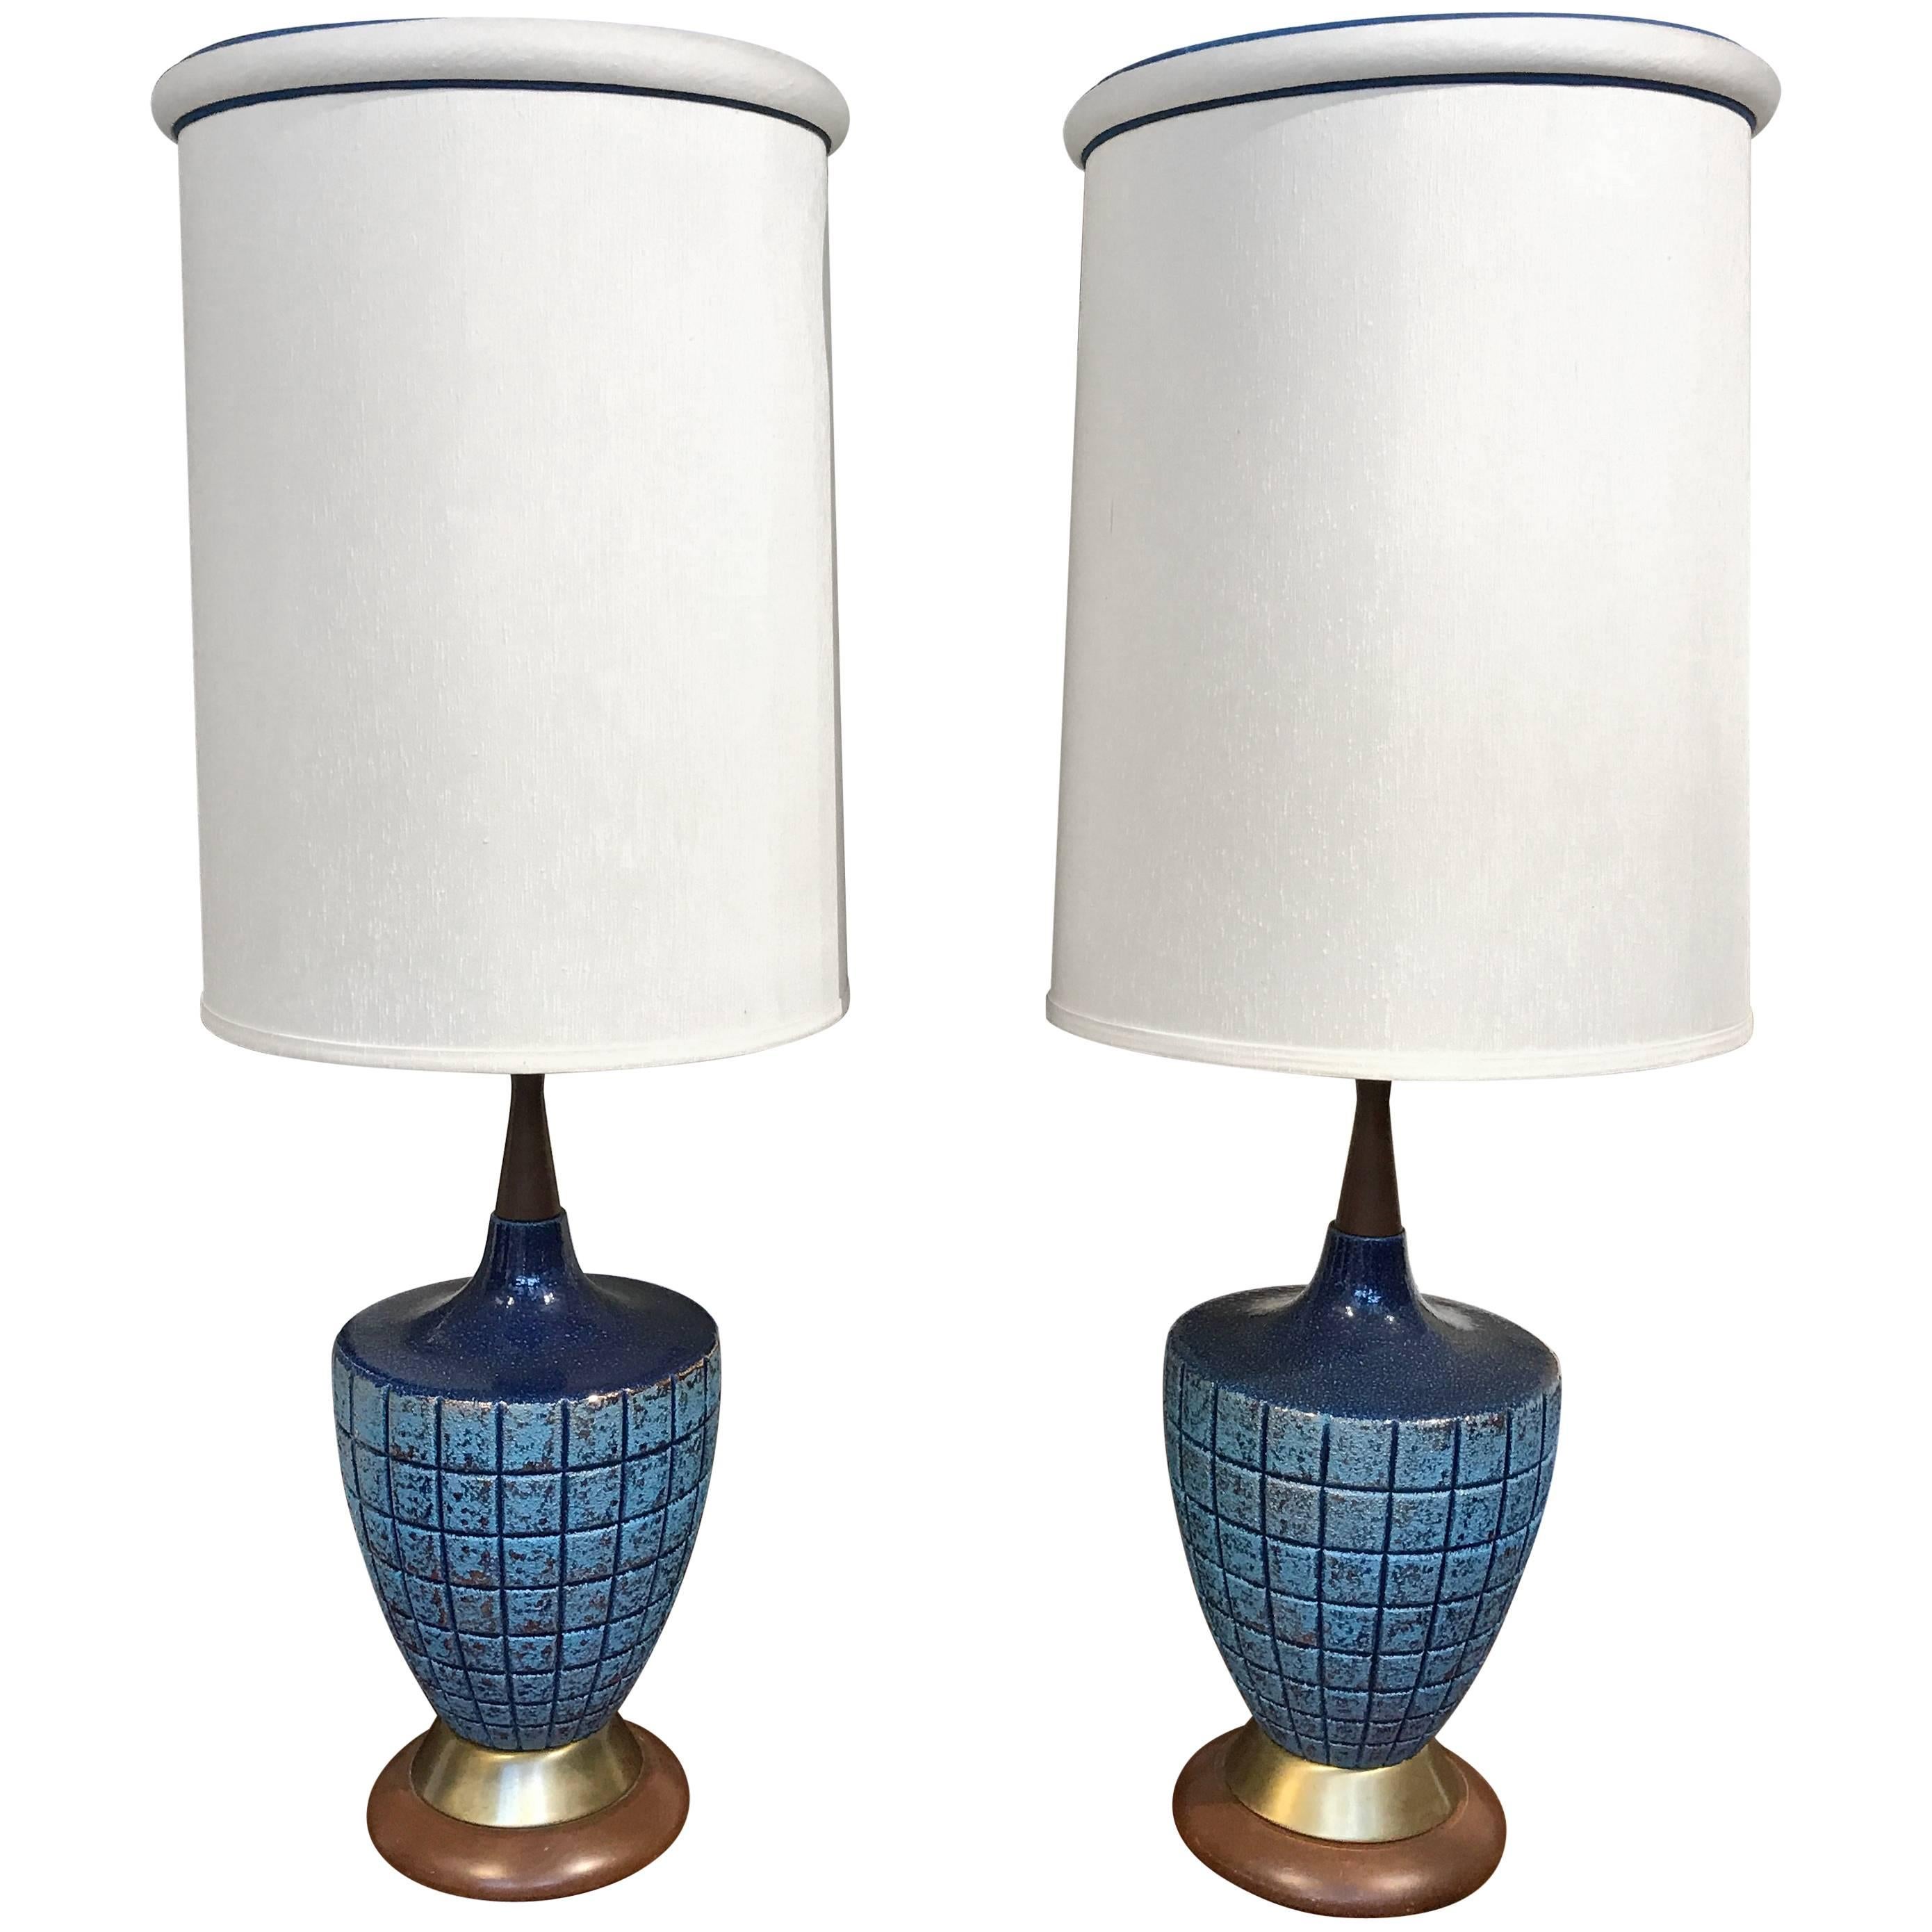 Vintage Blue Ceramic Lamps with Their Original Shades 